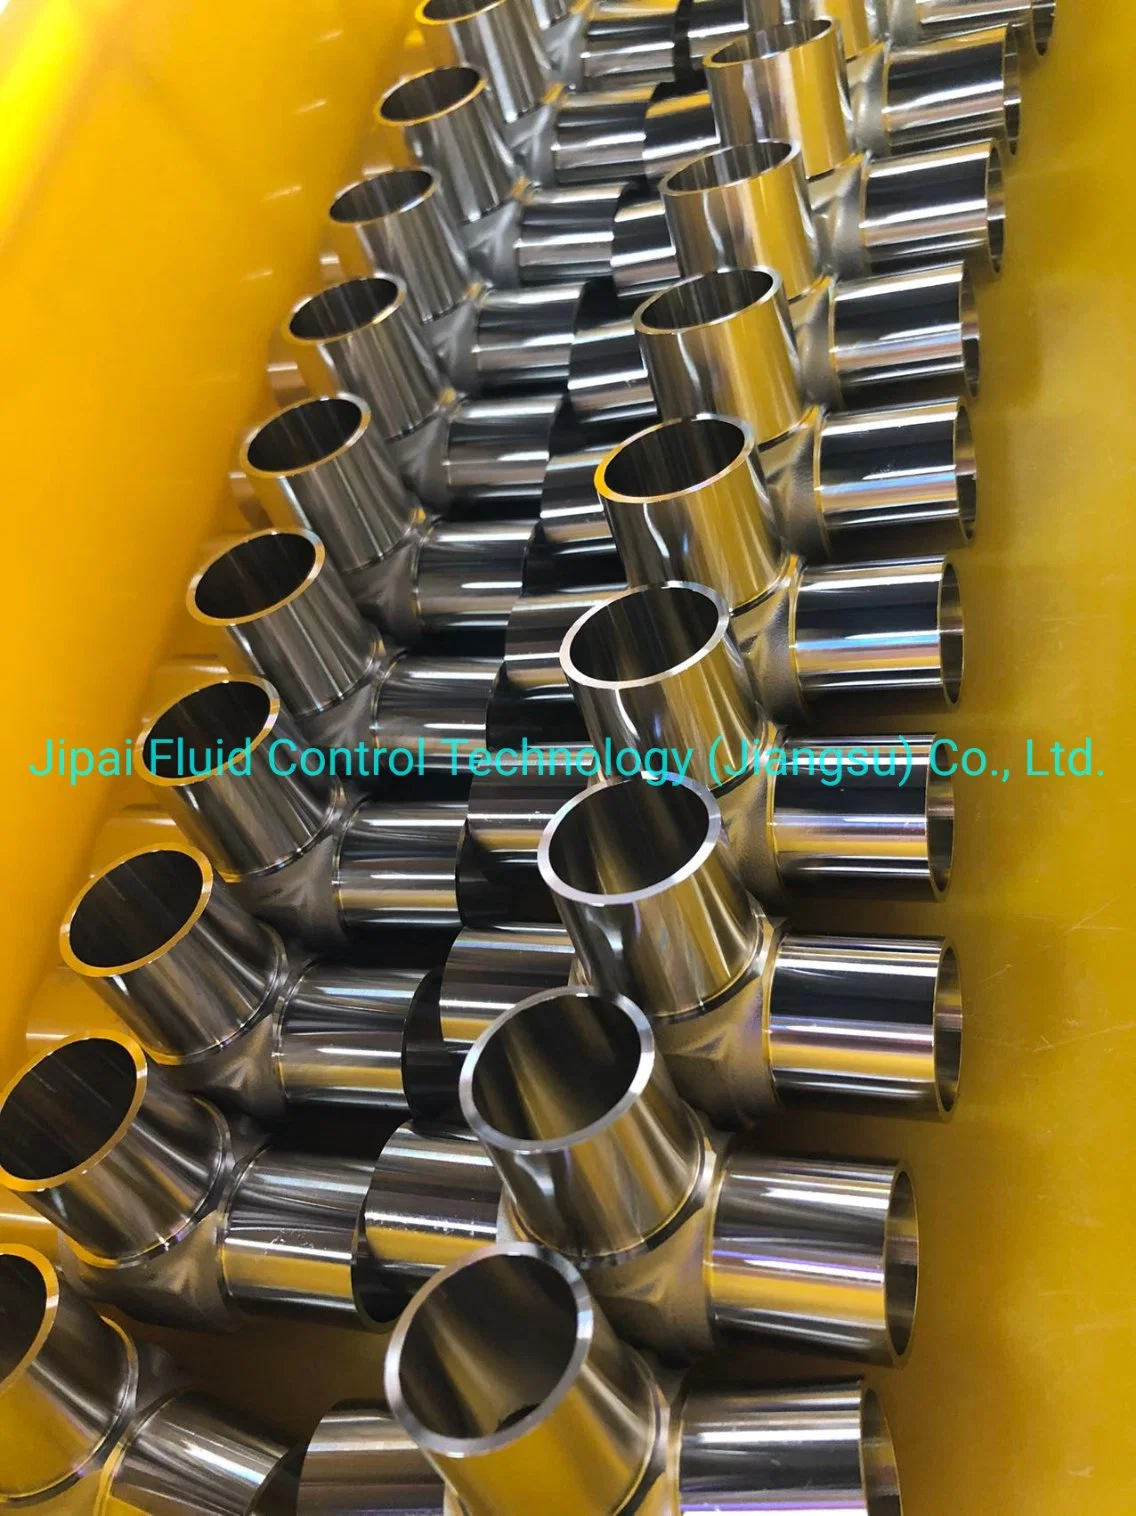 316L Stainless Steel 3/4 Inch VCR Fittings Metal Gasket Face Seal Fitting to Welding Fitting